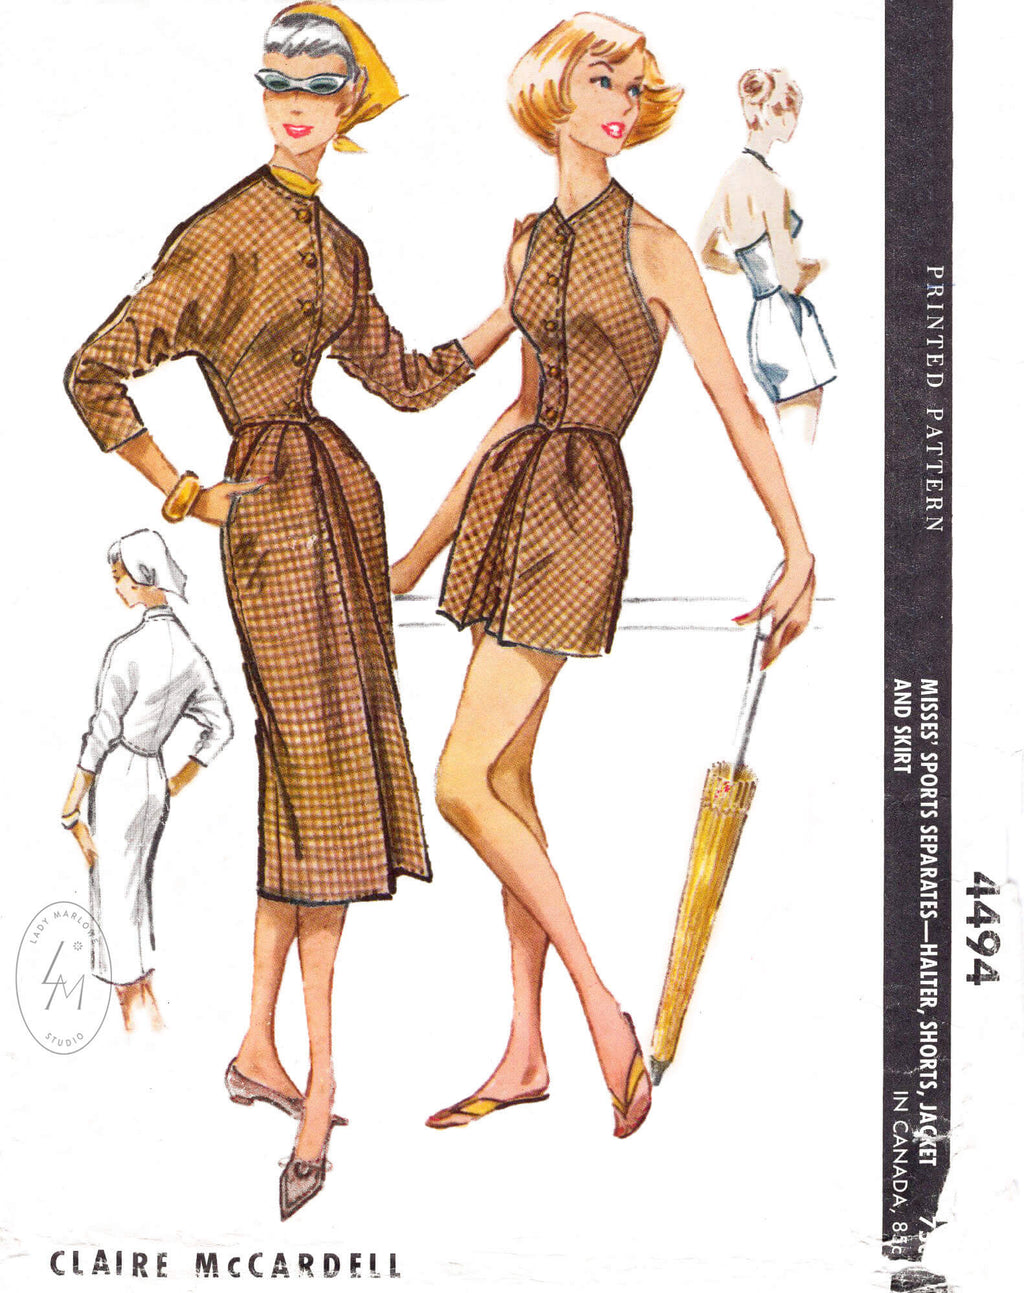 McCall's 4494 Claire McCardell 1950s 1960s vintage sewing pattern repo dolam sleeve dress beachwear